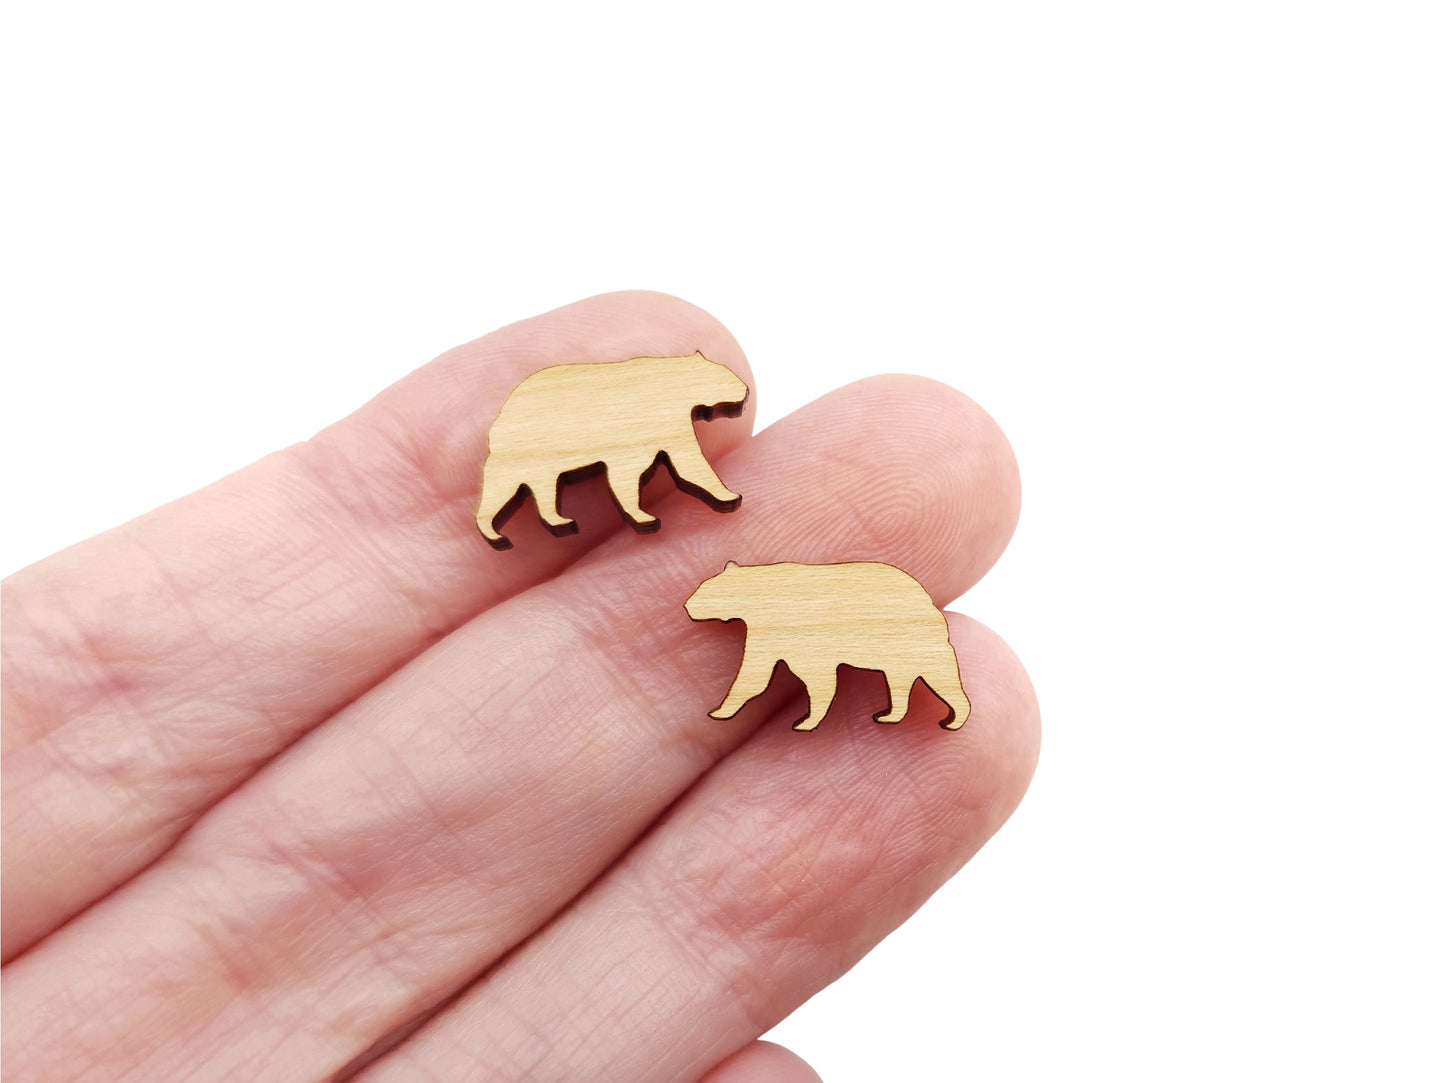 A hand holding a pair of wood and acrylic cabochon earring blanks cut in the shape of a bear